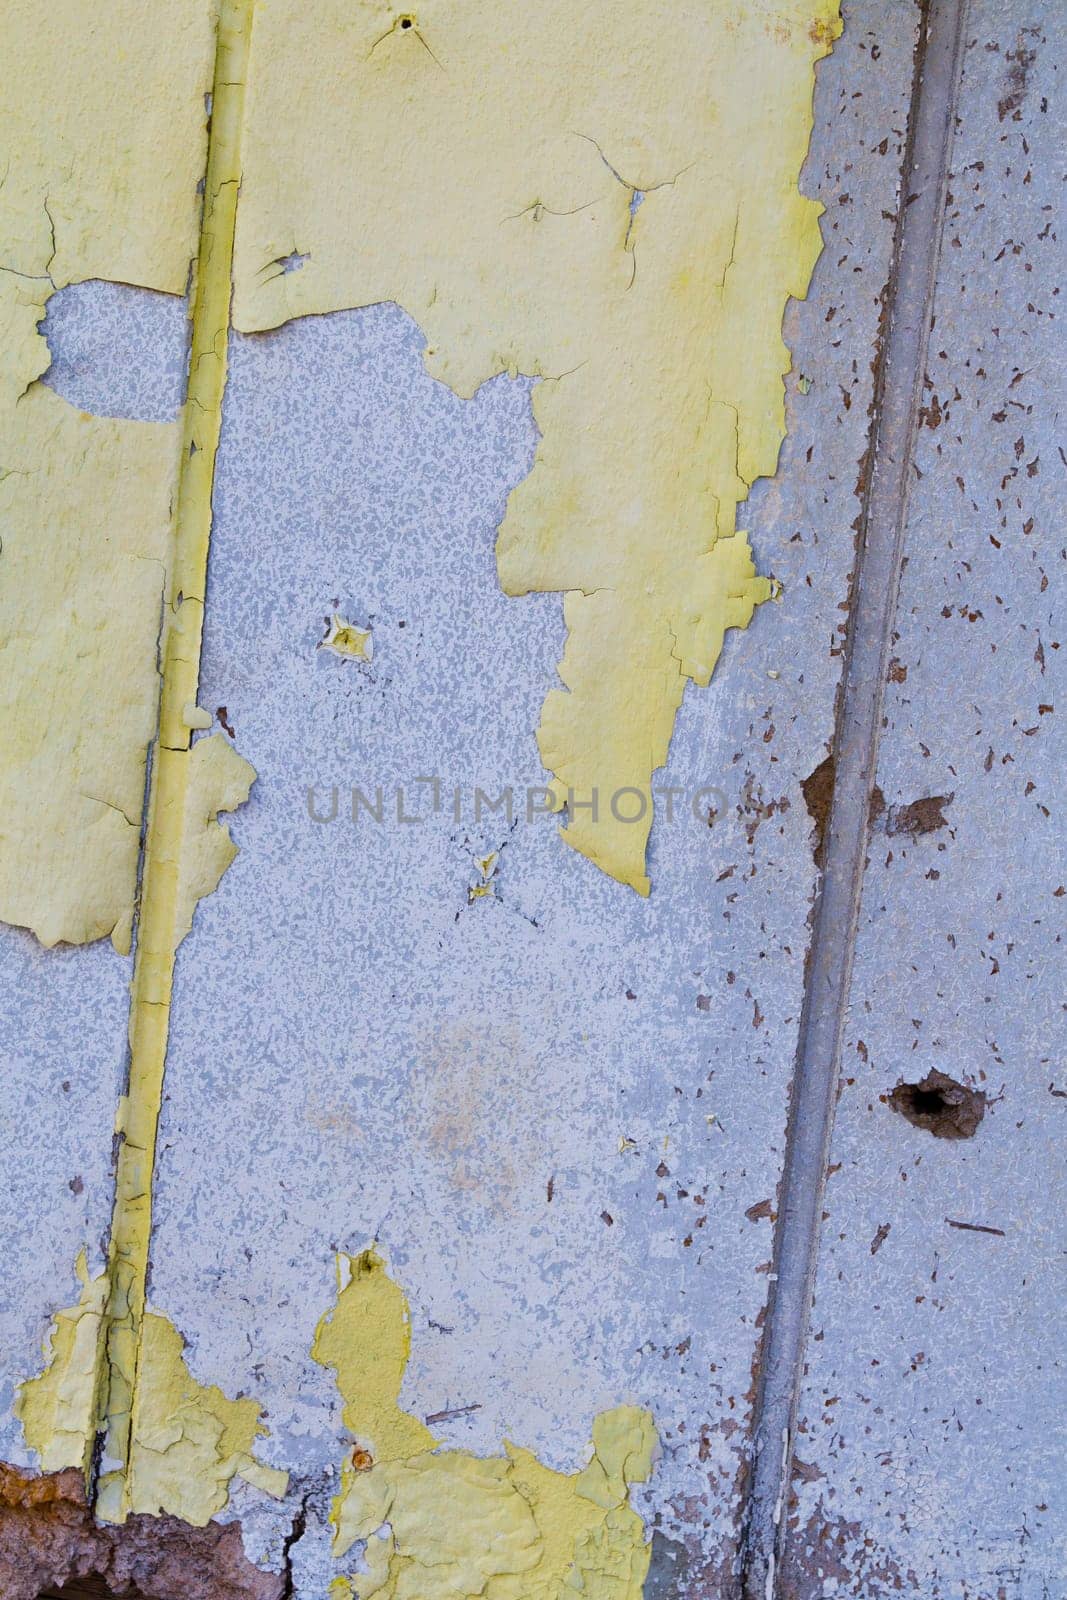 Urban Decay: Close-up view of deteriorating yellow paint reveals layers of history and wear. Rusty metal strip adds industrial charm. St. Louis, Missouri.